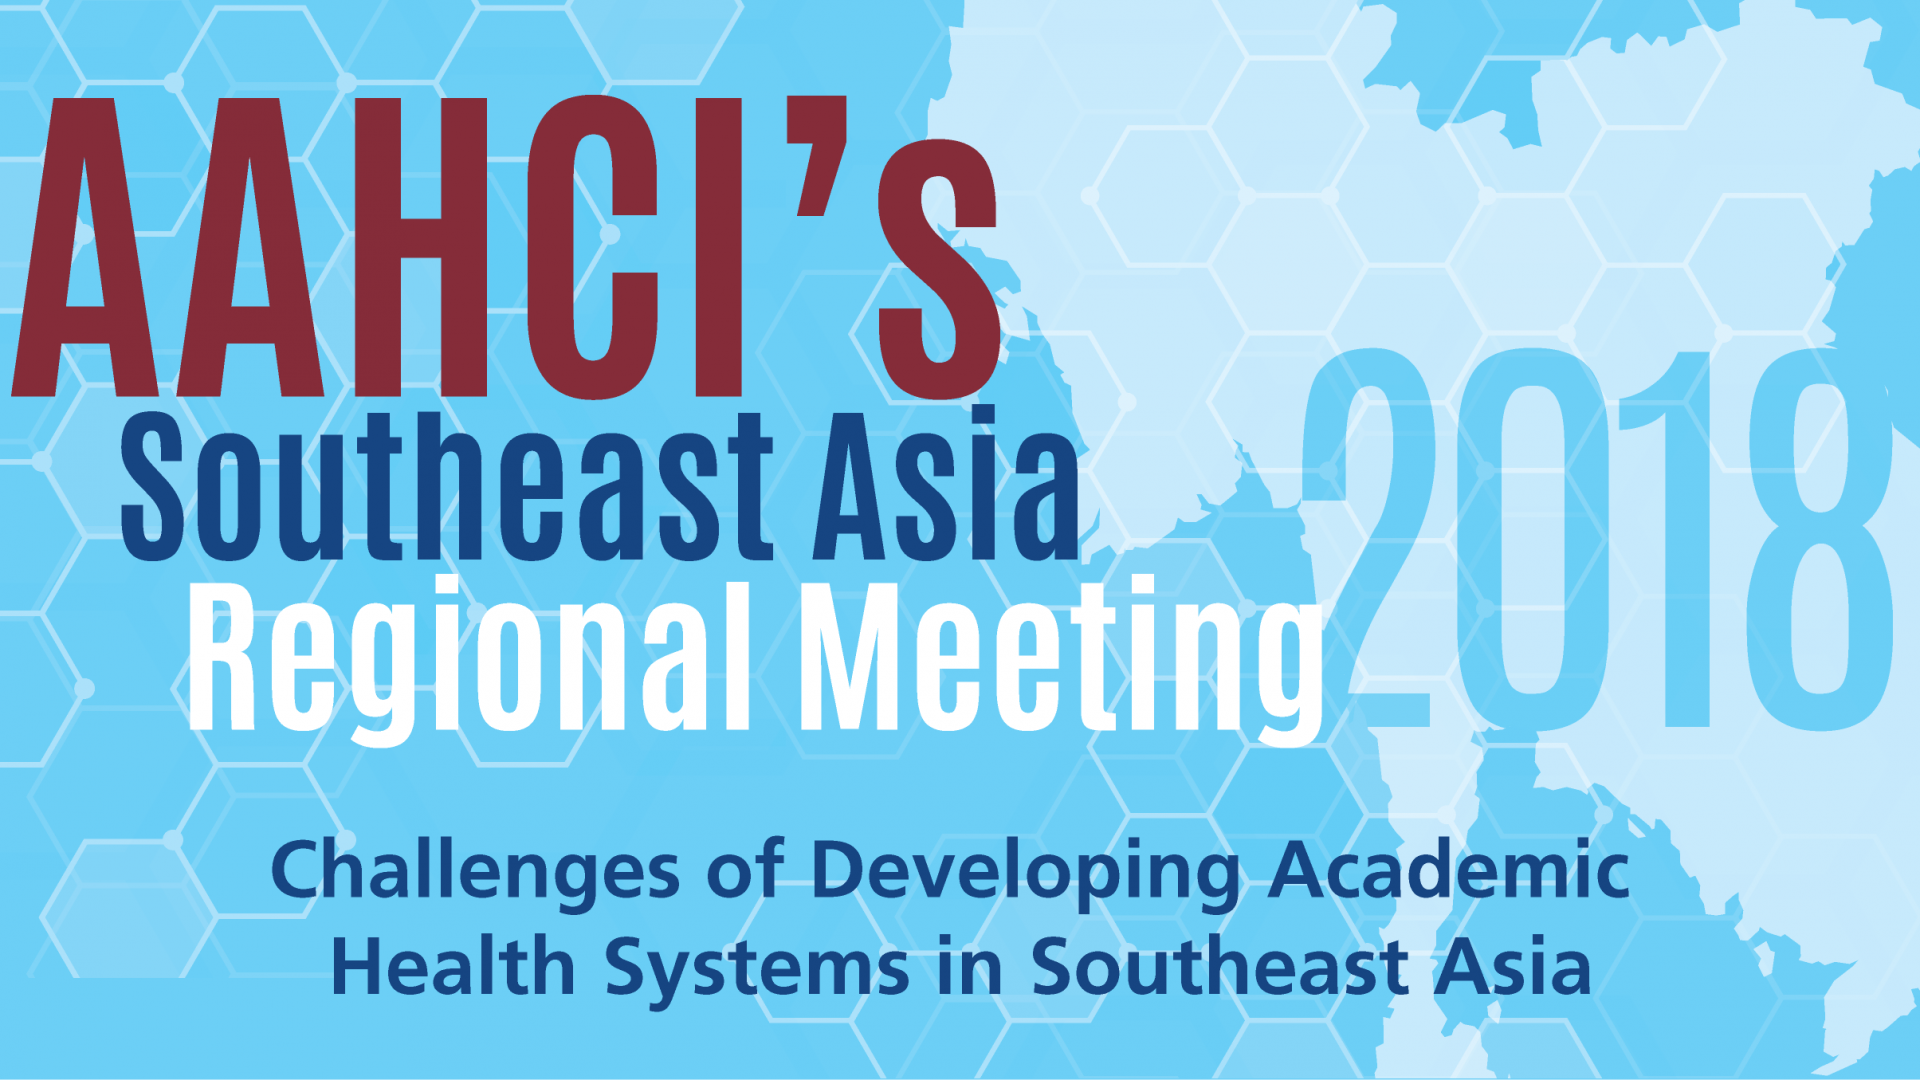 AAHCI’s South East Asia Regional Meeting 2018